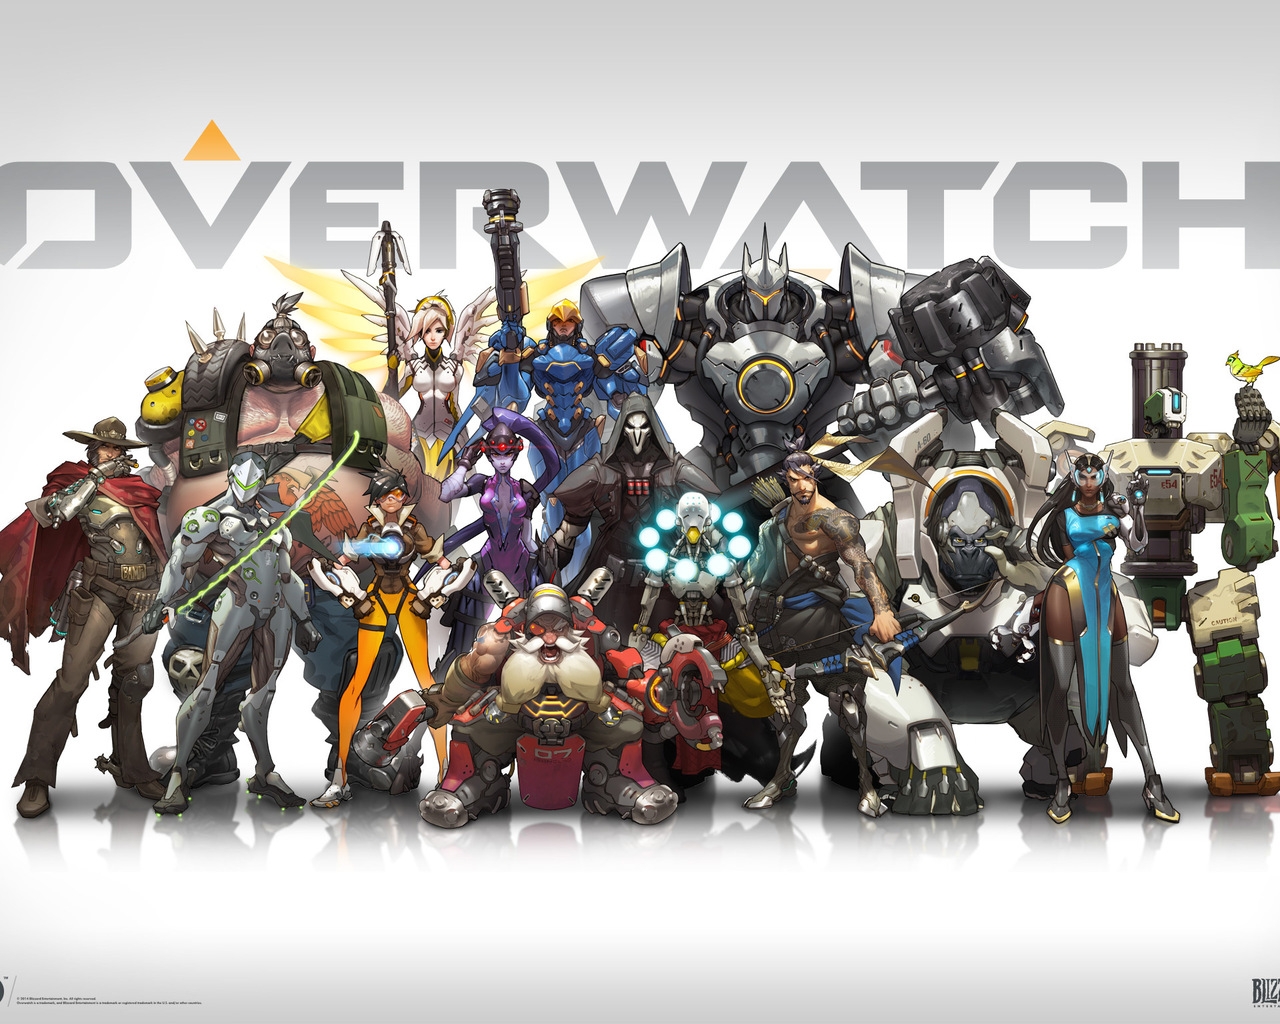 Overwatch Lineup for 1280 x 1024 resolution